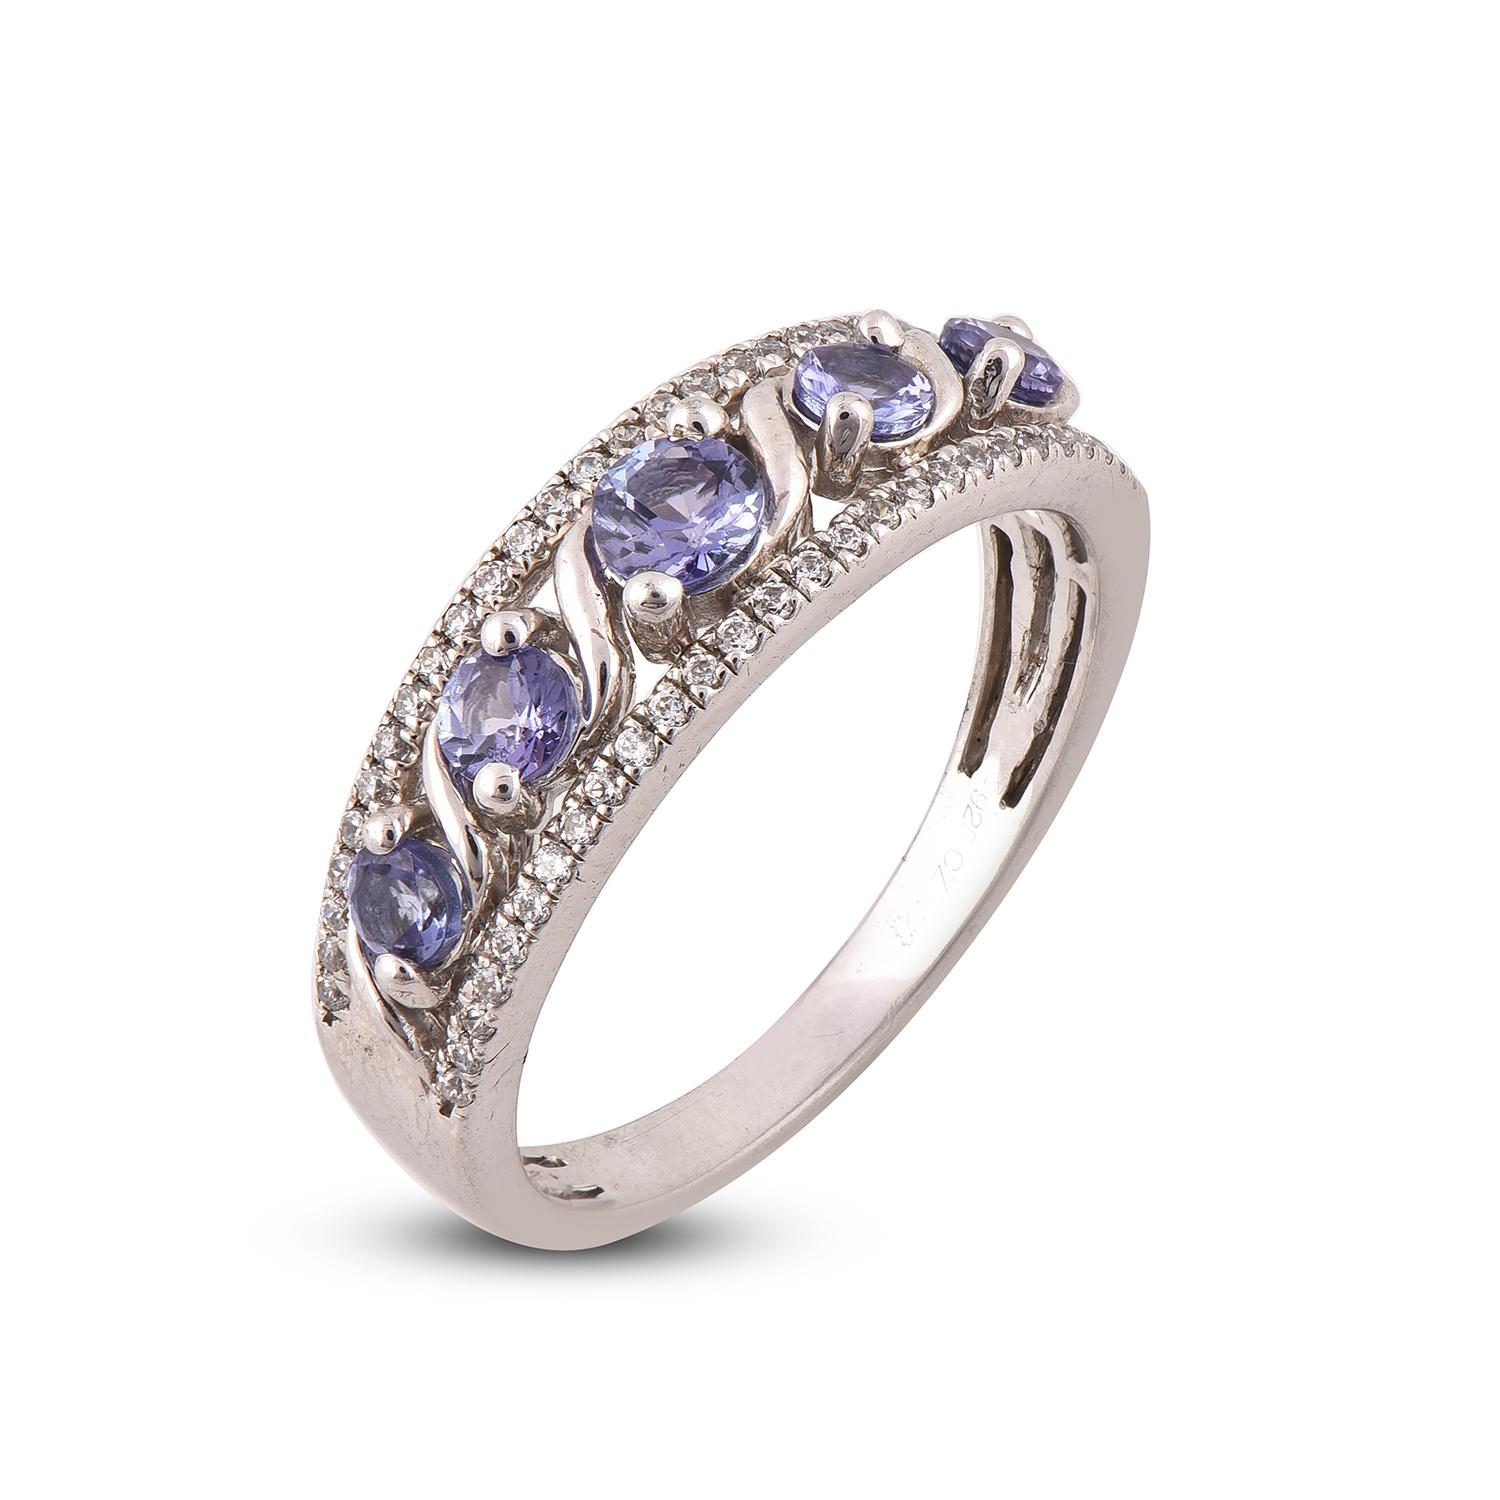 If your girl wants a classic engagement ring with a unique twist, this engagement ring with diamond accents might be the one! Handcrafted in 14 karat white gold with tanzanite and diamonds. Its features with 54 round white diamond and 5 round cut